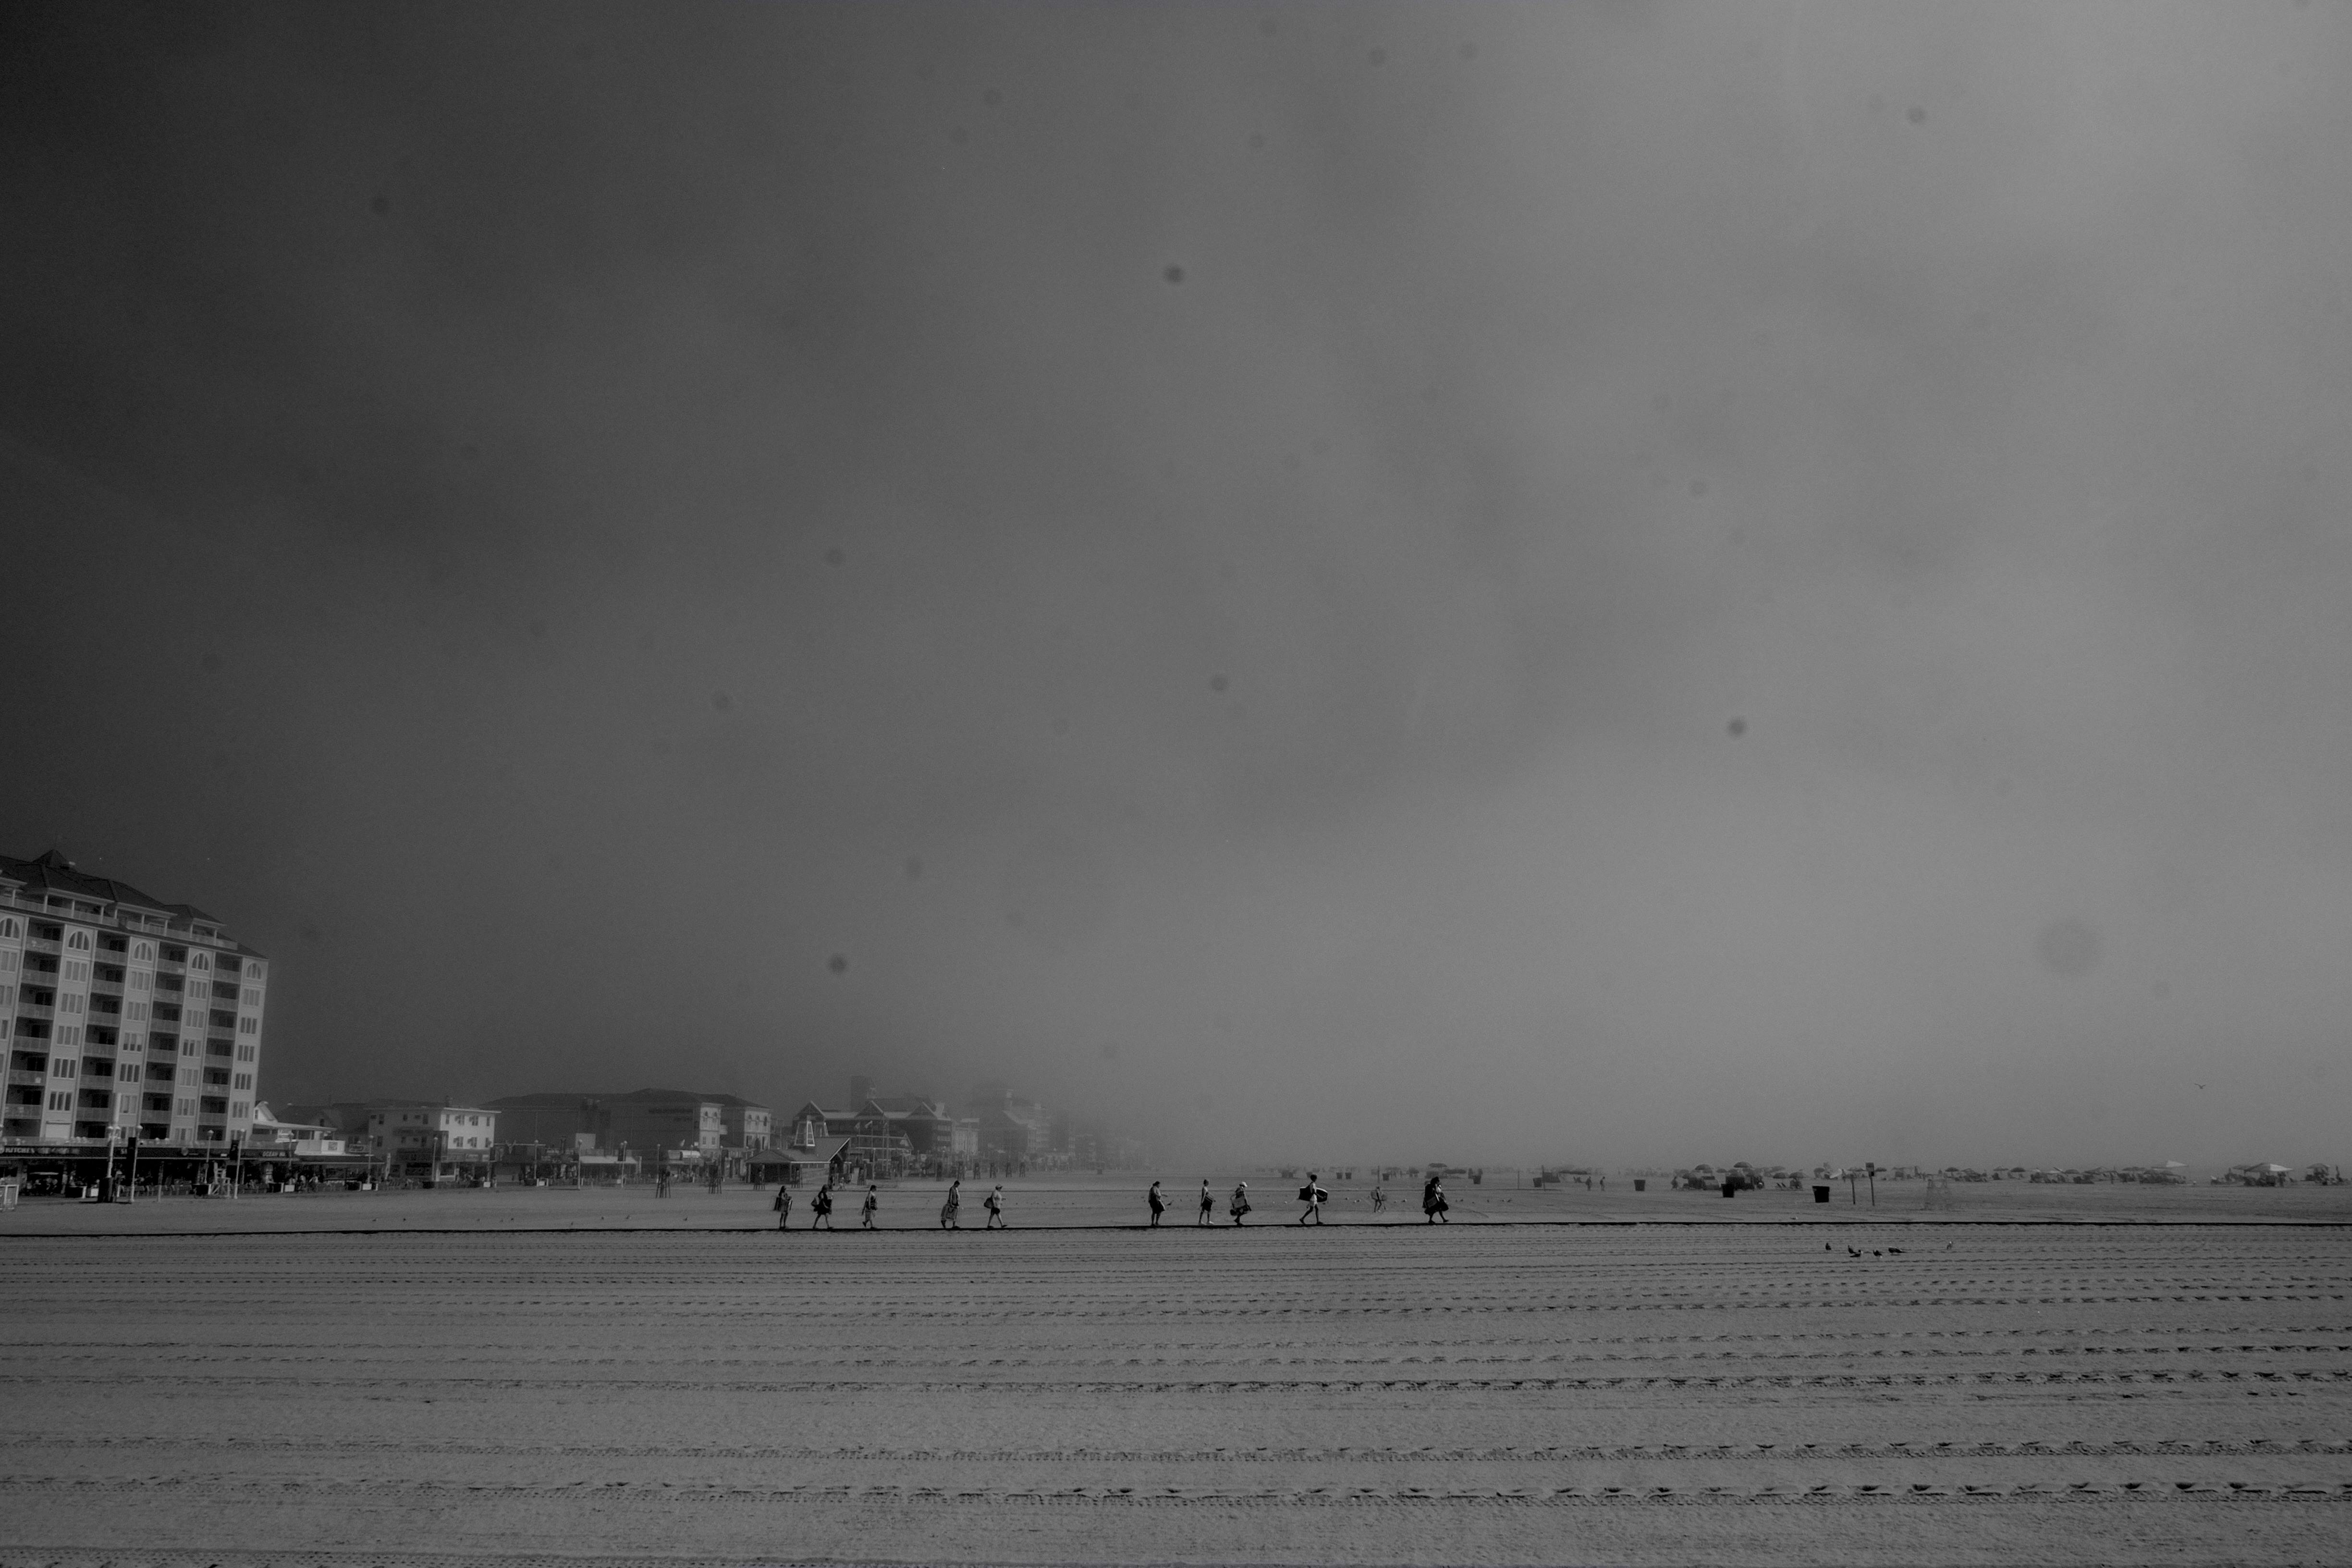 A black and white photo of a beach. People walk in the middle distance along a boardwalk, carrying beach supplies and boogie boards. Hotels and houses are visible in the distance, but fog obscures the sky.